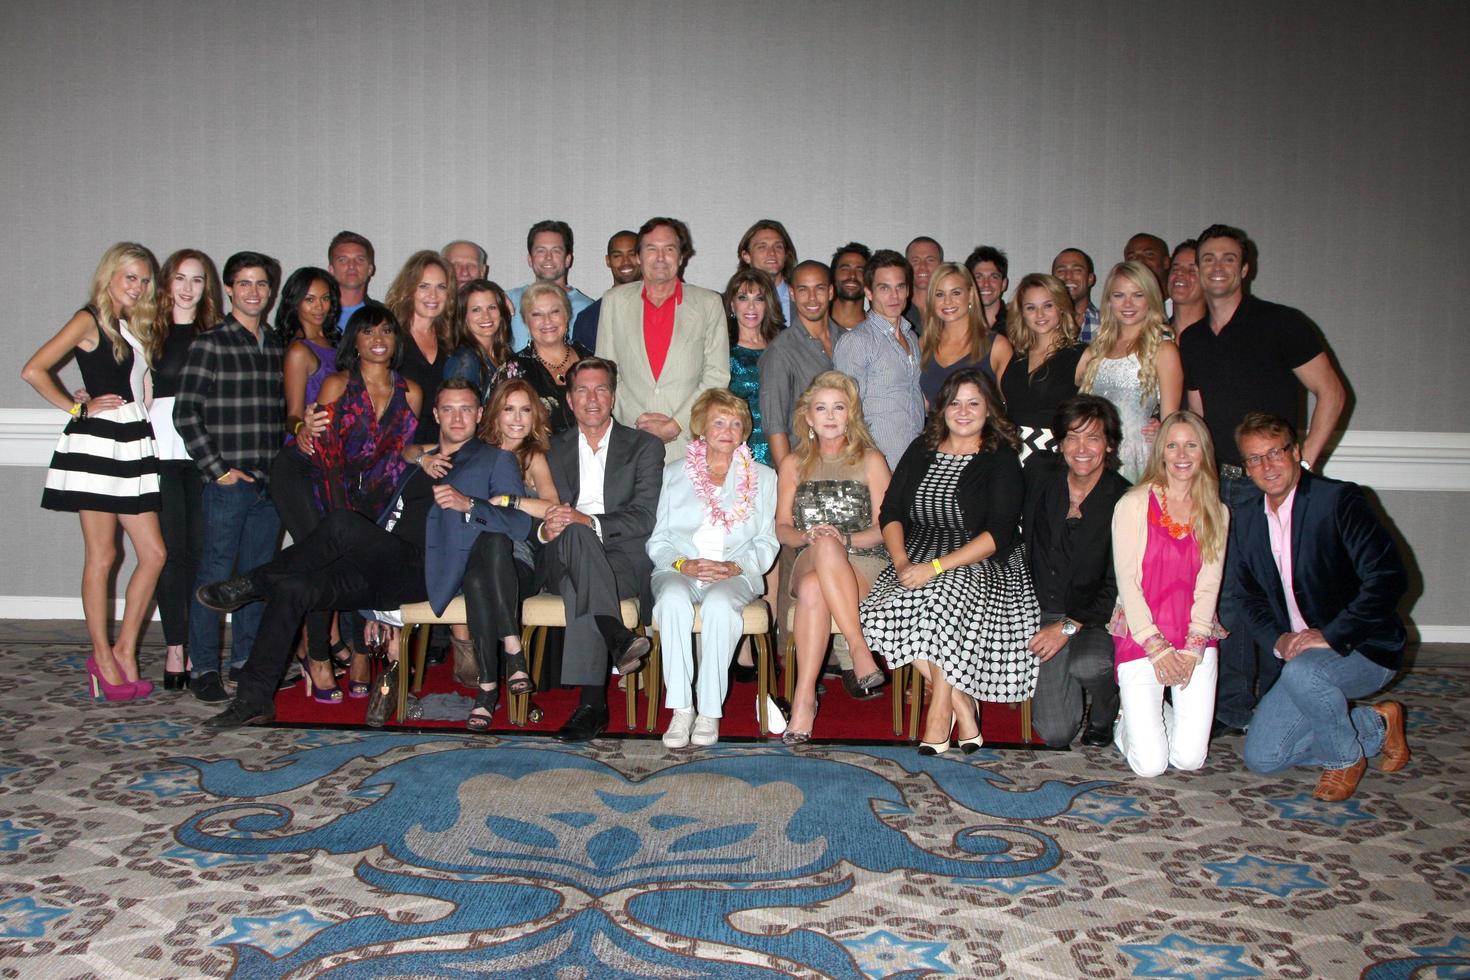 los angeles, 24 aug - young and the restless cast, lee bell, angelica mcdaniel bij het young and restless fanclub diner in het universele sheraton hotel op 24 augustus 2013 in los angeles, ca. foto